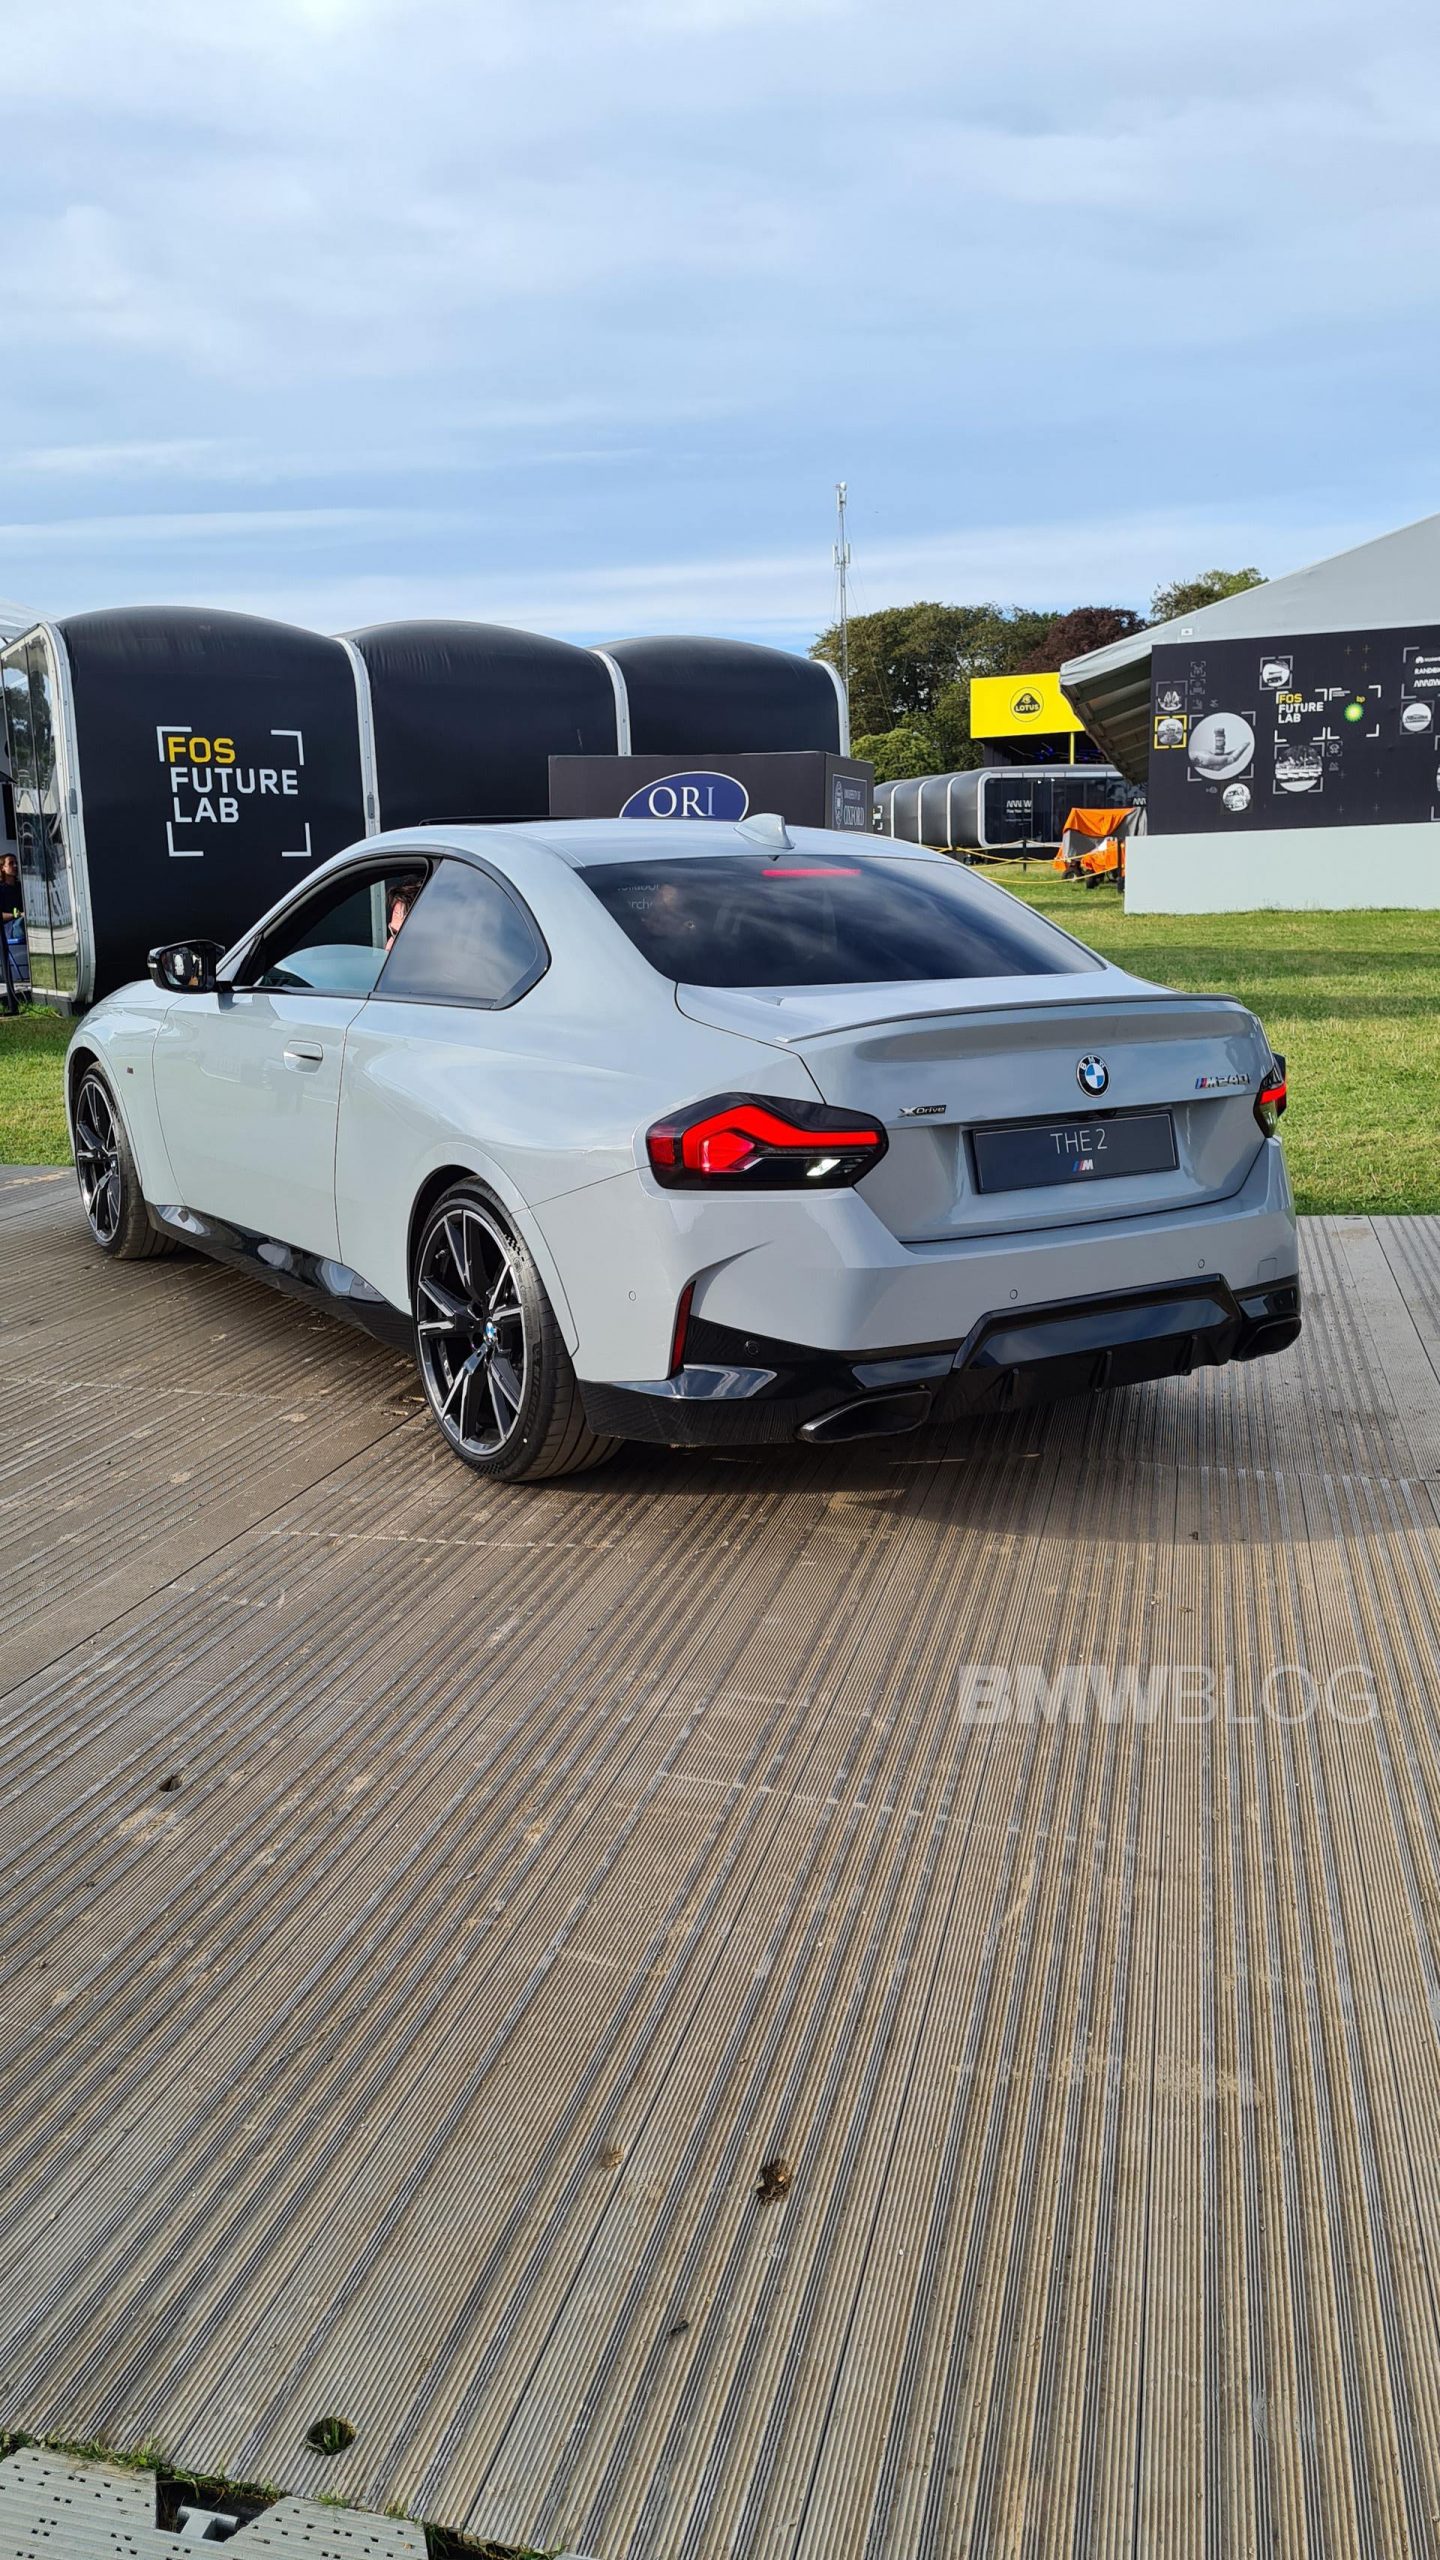 2022 BMW M240i in Brooklyn Grey live from Goodwood